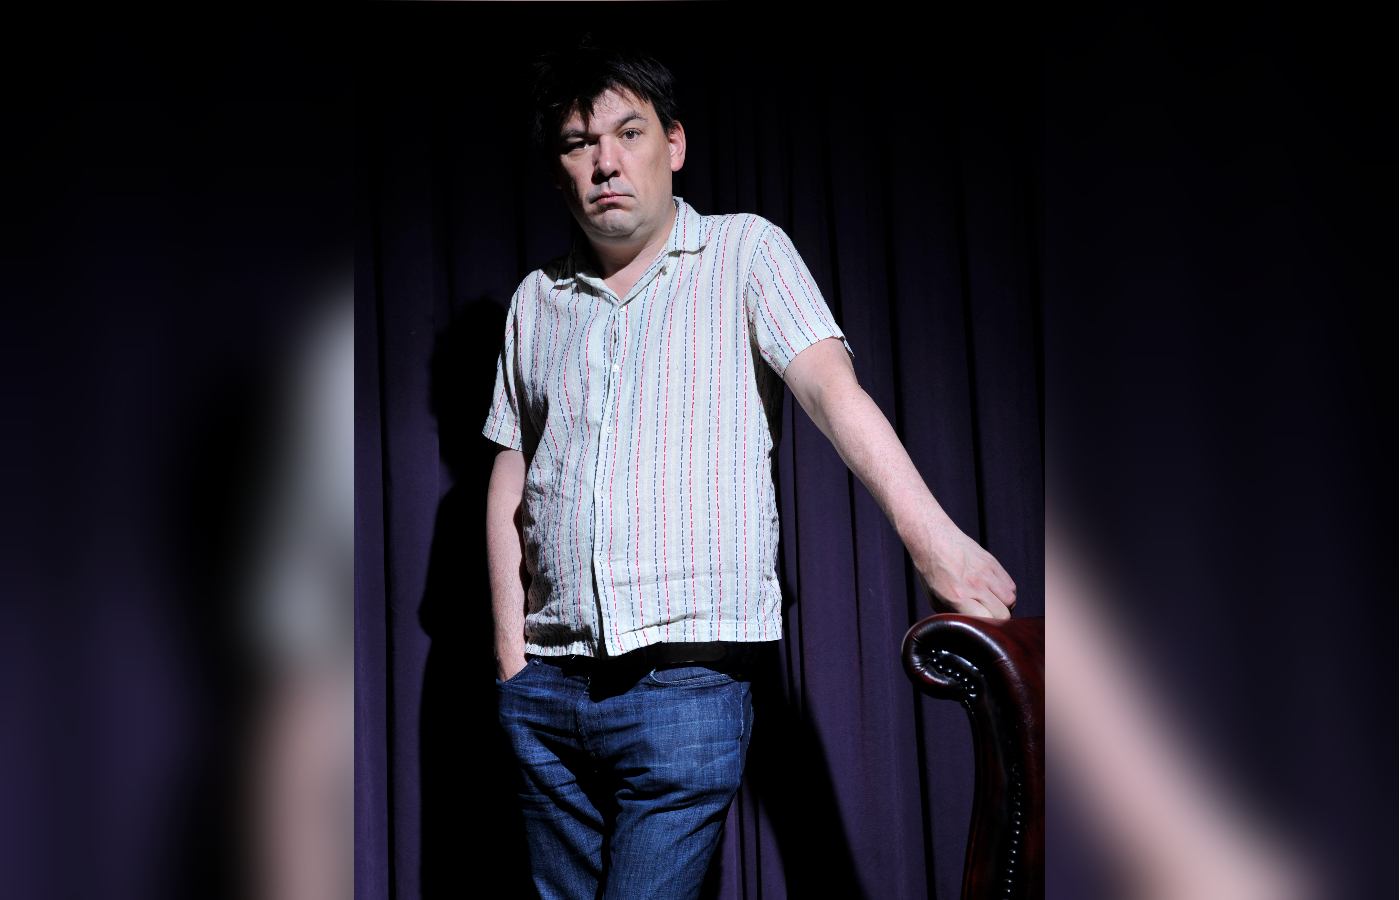 Graham Linehan was named as the reason Leith Arches cancelled the gig.